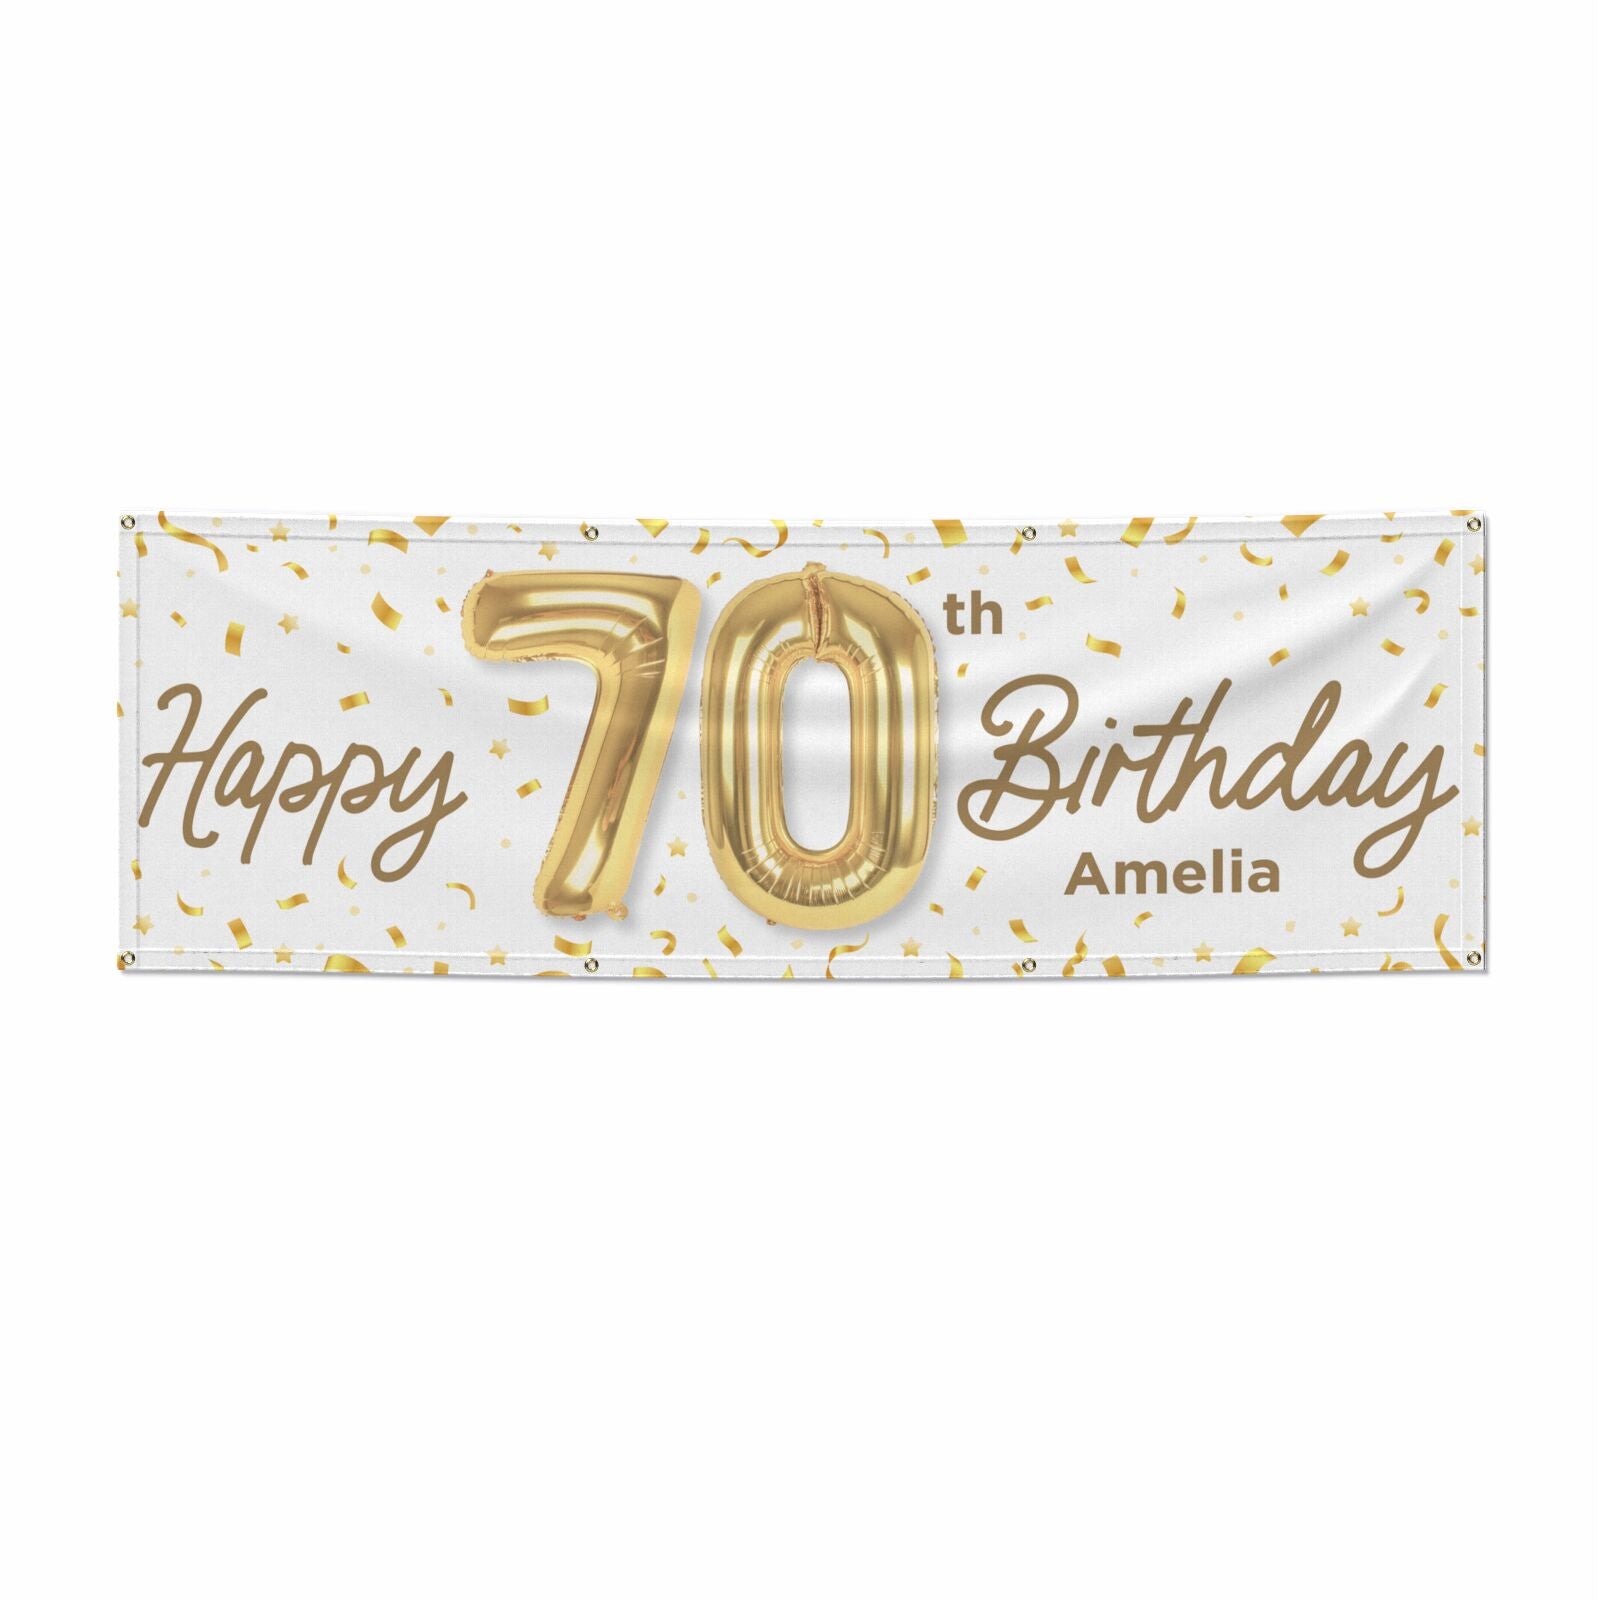 Personalised 70th Birthday 6x2 Vinly Banner with Grommets